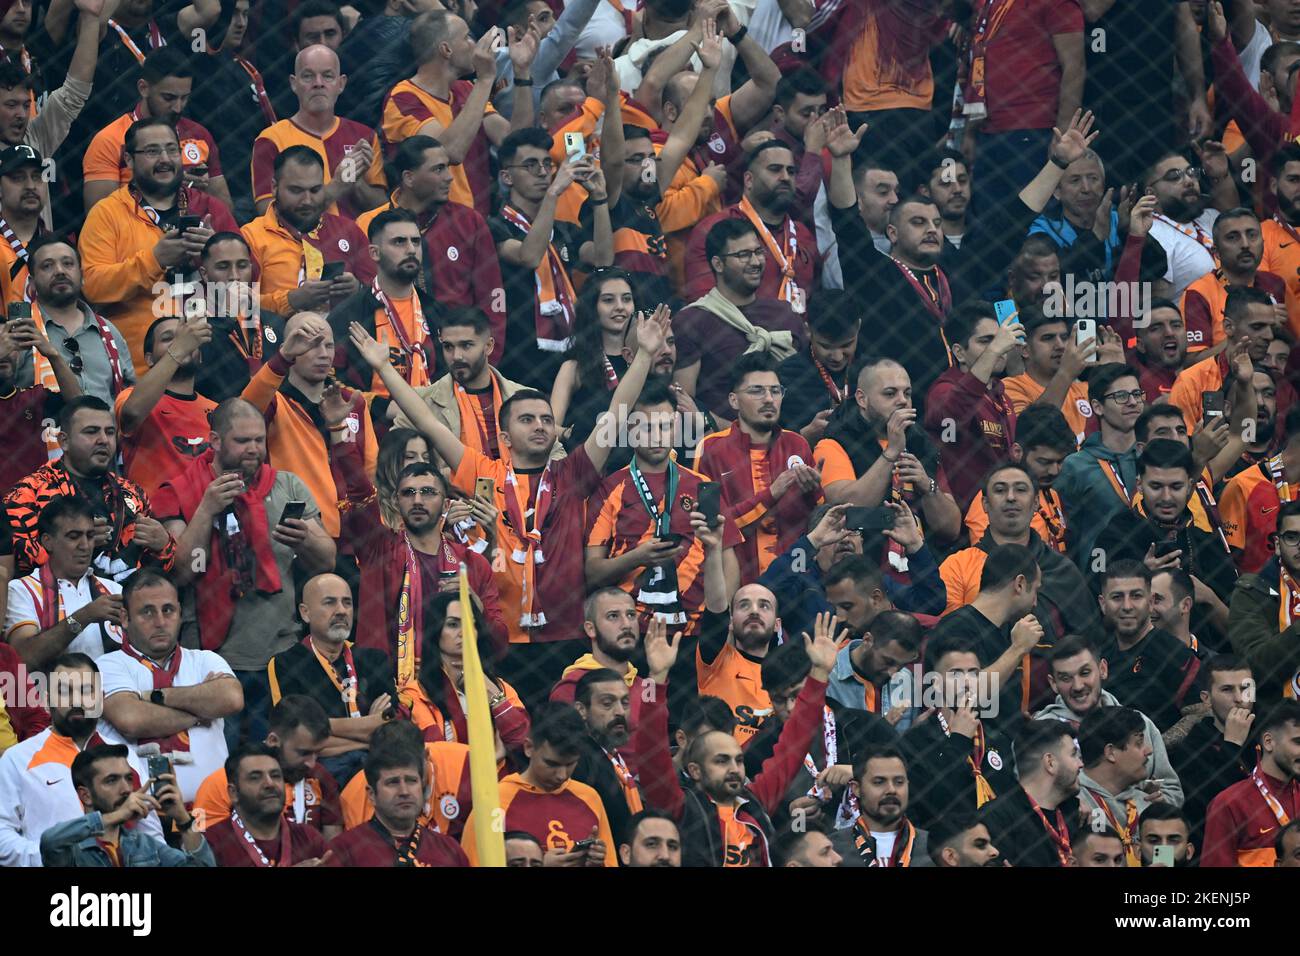 ISTANBUL - Galatasaray supporters during the Turkish Super Lig match between Galatasaray AS and Besiktas AS at Ali Sami Yen Spor Kompleksi stadium on November 5, 2022 in Istanbul, Turkey. ANP | Dutch Height | GERRIT FROM COLOGNE Stock Photo